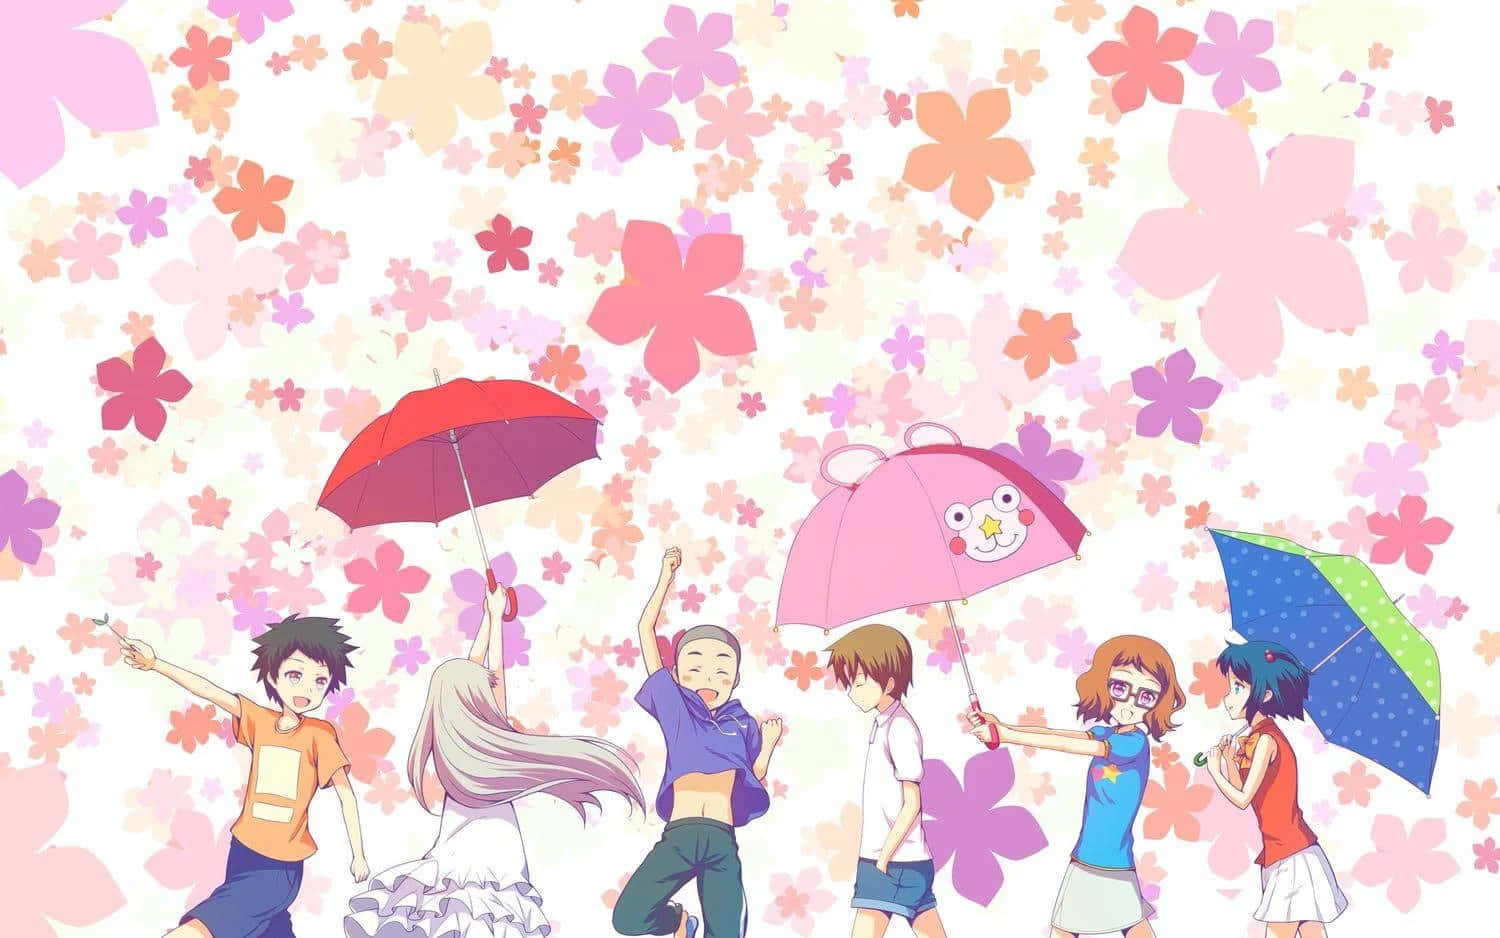 Friends forever — Jintan and the "Super Peace Busters" from anime series Anohana